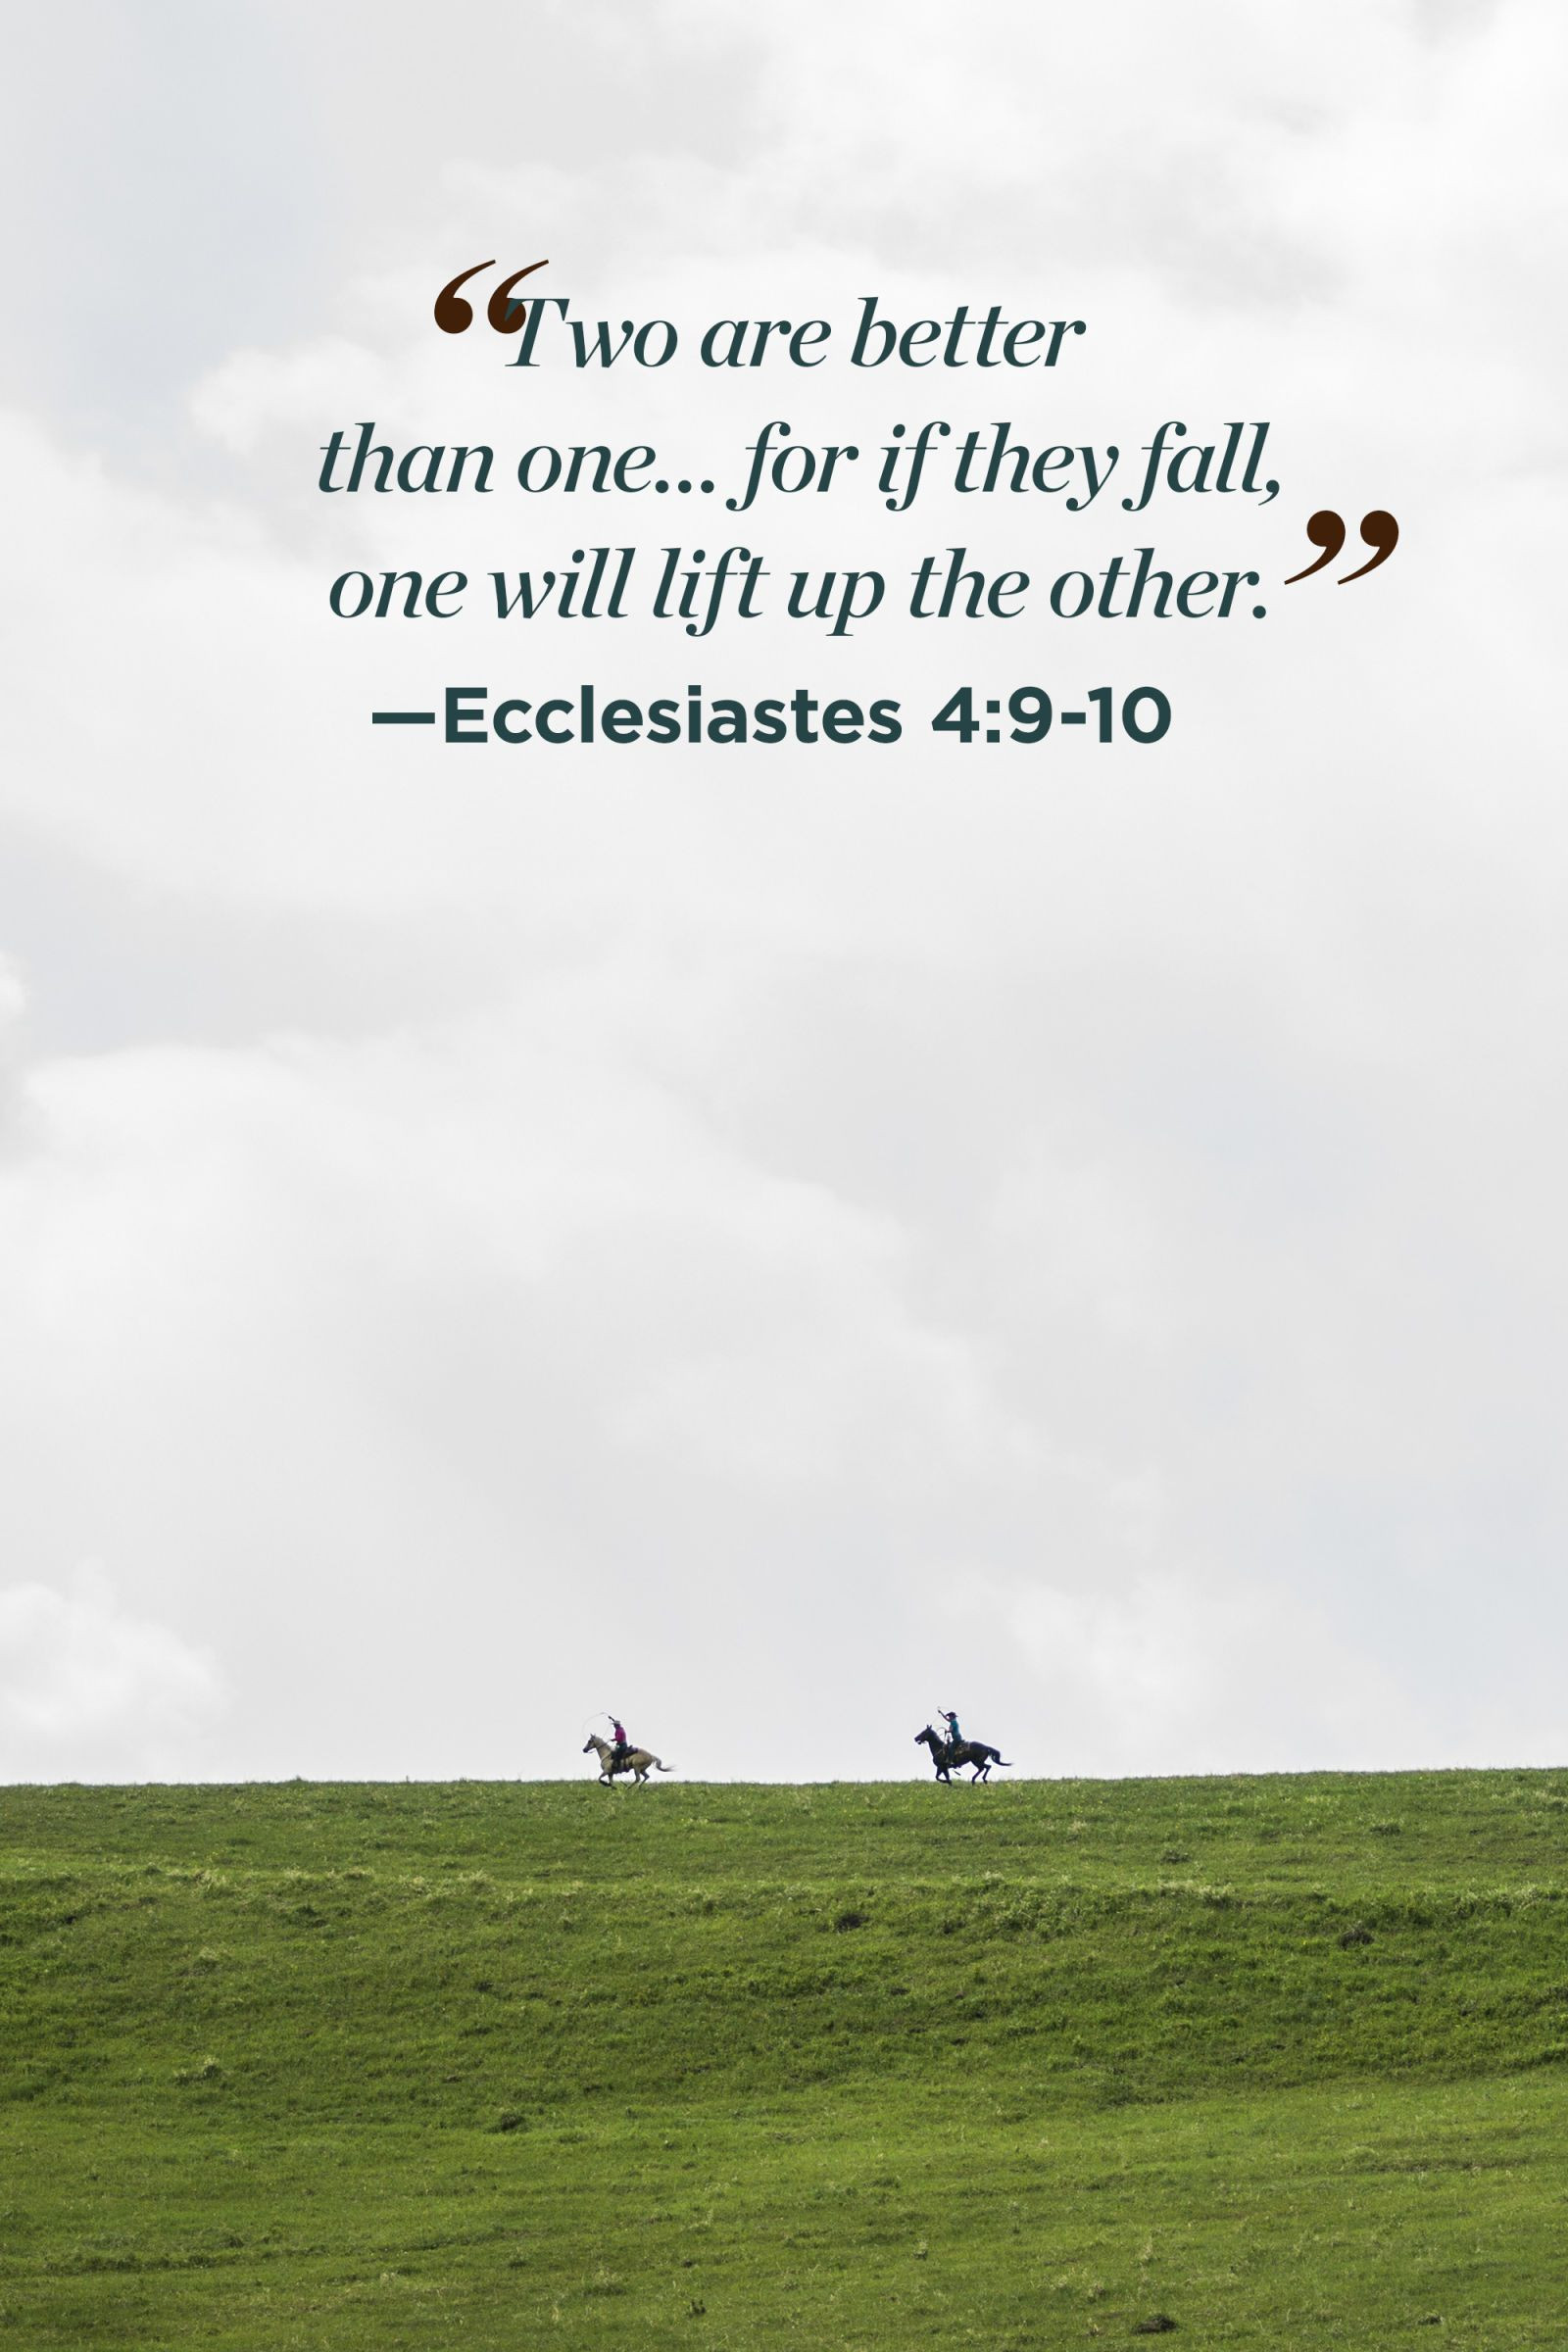 Inspirational Biblical Quotes
 Pin on inspirations